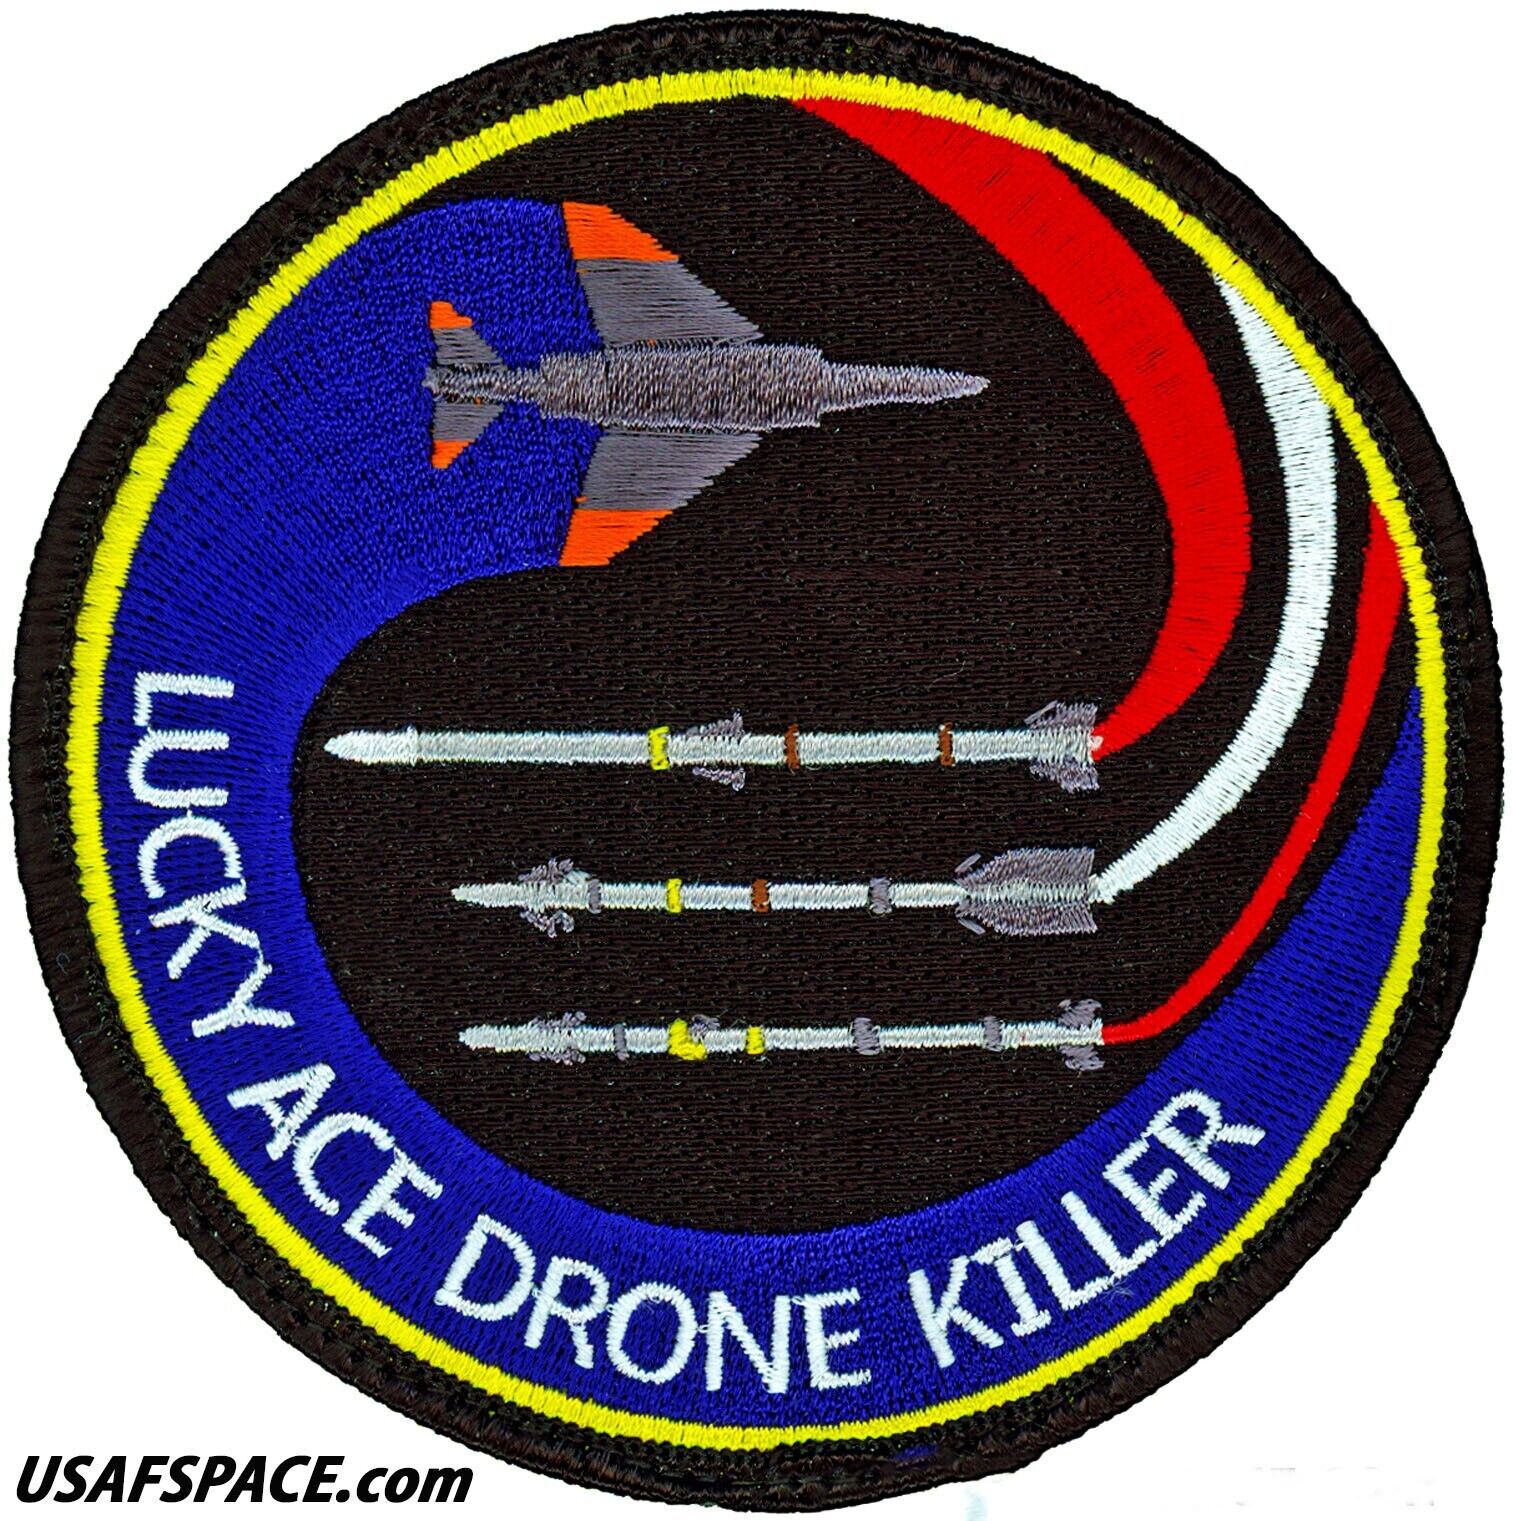 USAF 83rd FIGHTER WEAPONS SQ - LUCKY ACE DRONE KILLER -ORIGINAL AIR FORCE PATCH 